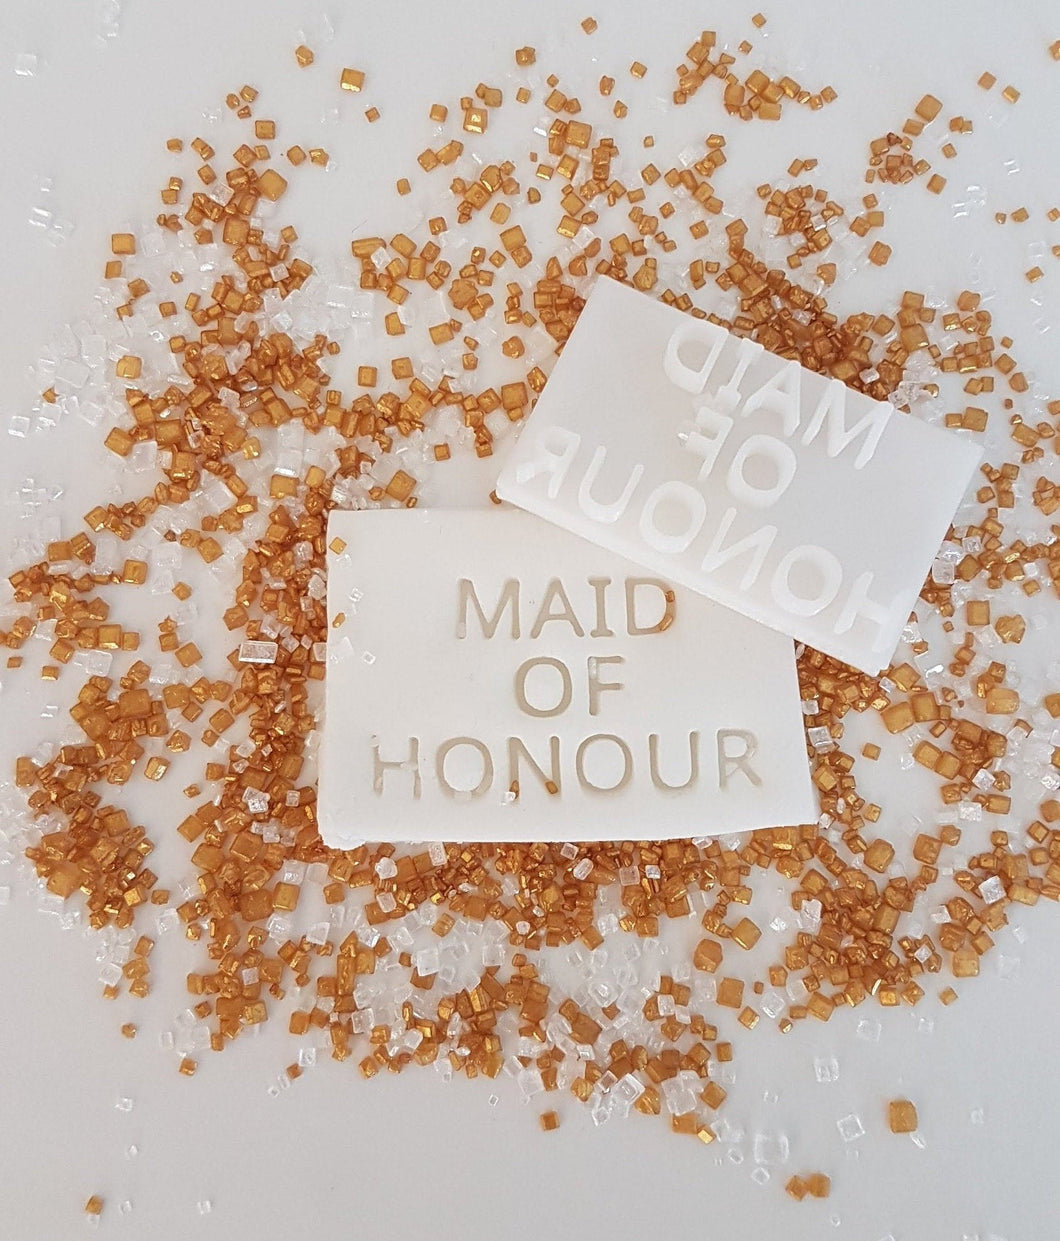 Maid of Honour/Honor Stamp|Baking|Cookie Stamp|Wedding Party|Bridal Shower|Hen Party Do